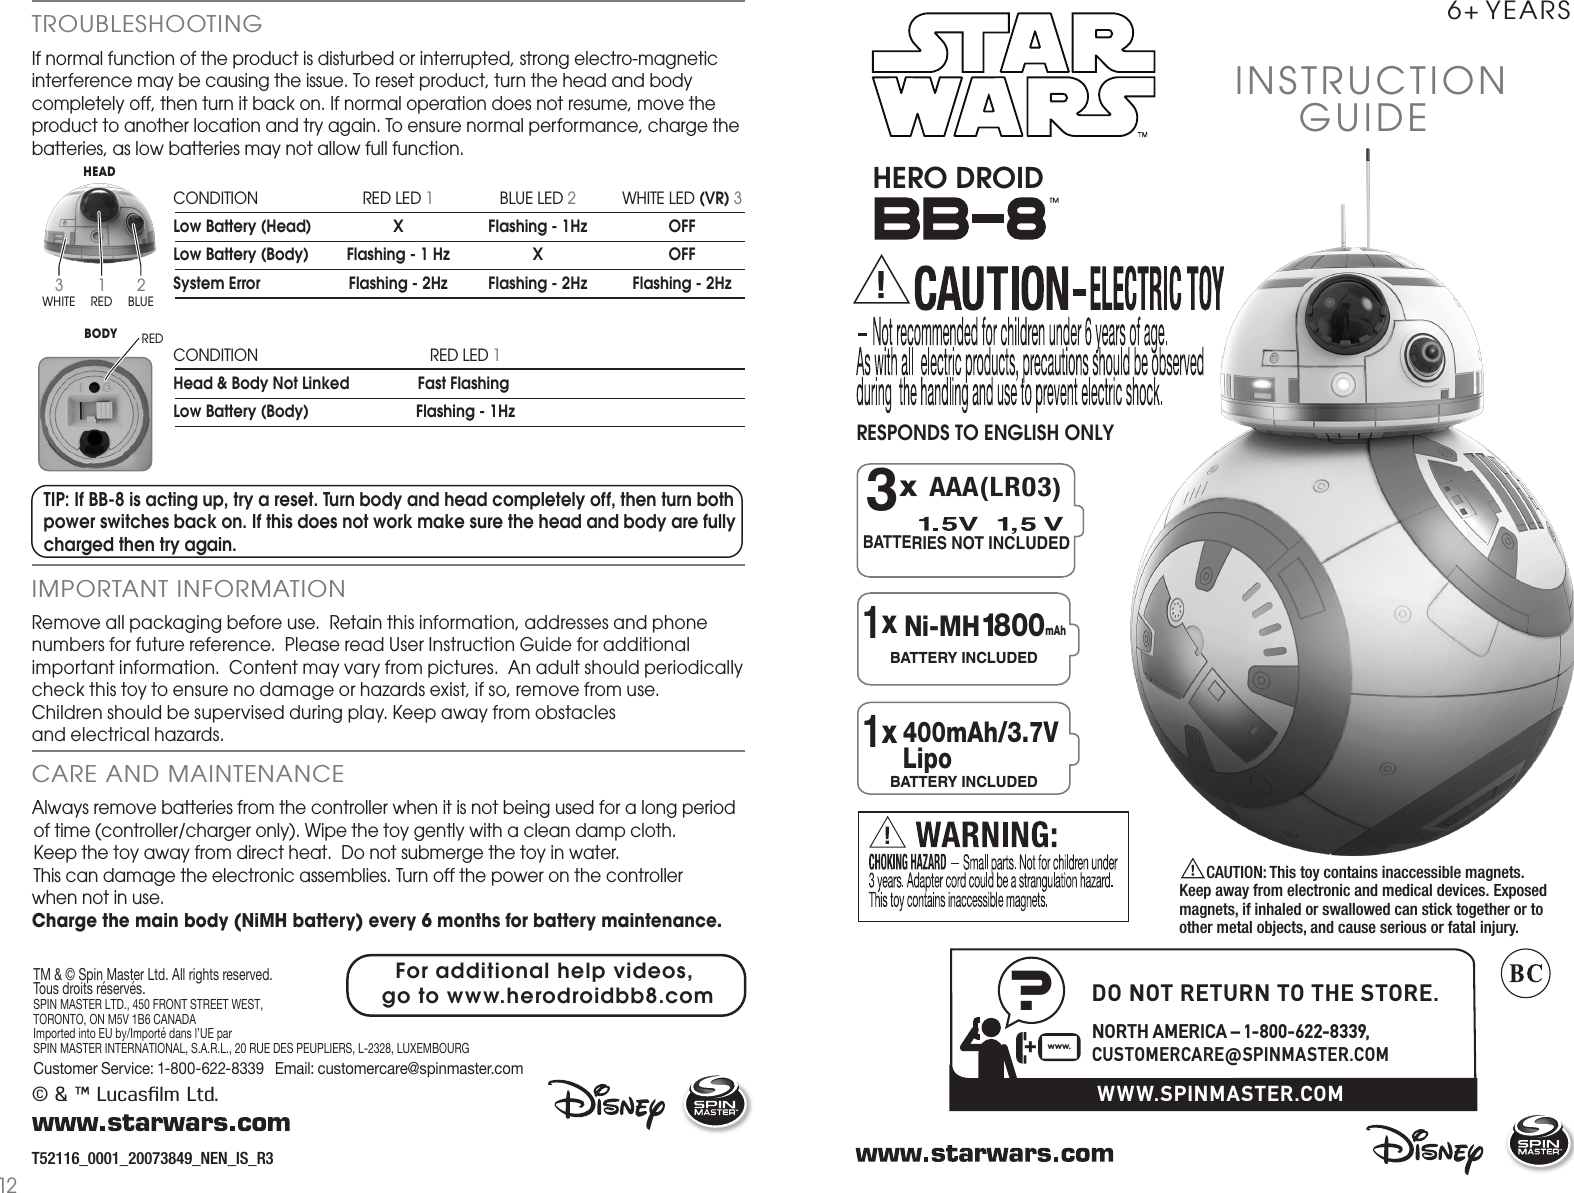 ™INSTRUCTIONGUIDE 6+ YEARSHERO DROID?+www.WWW.SPINMASTER.COMDO NOT RETURN TO THE STORE.NORTH AMERICA – 1-800-622-8339, CUSTOMERCARE@SPINMASTER.COMBATTERIES NOT INCLUDEDx AAA(LR03)3xBATTERY INCLUDED1 Ni-MH1800 mAhxBATTERY INCLUDED1400mAh/3.7V Lipo© &amp; ™ Lucasﬁlm Ltd.If normal function of the product is disturbed or interrupted, strong electro-magnetic interference may be causing the issue. To reset product, turn the head and body completely off, then turn it back on. If normal operation does not resume, move the product to another location and try again. To ensure normal performance, charge the batteries, as low batteries may not allow full function.T52116_0001_20073849_NEN_IS_R3TROUBLESHOOTINGRemove all packaging before use.  Retain this information, addresses and phone numbers for future reference.  Please read User Instruction Guide for additional important information.  Content may vary from pictures.  An adult should periodically check this toy to ensure no damage or hazards exist, if so, remove from use.  Children should be supervised during play. Keep away from obstacles and electrical hazards.IMPORTANT INFORMATIONAlways remove batteries from the controller when it is not being used for a long period of time (controller/charger only). Wipe the toy gently with a clean damp cloth.  Keep the toy away from direct heat.  Do not submerge the toy in water.   This can damage the electronic assemblies. Turn off the power on the controller when not in use.Charge the main body (NiMH battery) every 6 months for battery maintenance.CARE AND MAINTENANCE  CAUTION: This toy contains inaccessible magnets. Keep away from electronic and medical devices. Exposed magnets, if inhaled or swallowed can stick together or to other metal objects, and cause serious or fatal injury.RESPONDS TO ENGLISH ONLYCONDITION  RED LED 1  BLUE LED 2  WHITE LED (VR) 3Low Battery (Head)  X  Flashing - 1Hz  OFFLow Battery (Body)  Flashing - 1 Hz  X  OFFSystem Error  Flashing - 2Hz  Flashing - 2Hz  Flashing - 2HzCONDITION  RED LED 1  Head &amp; Body Not Linked   Fast Flashing Low Battery (Body)  Flashing - 1Hz3WHITEHEADBODY1RED2BLUETIP: If BB-8 is acting up, try a reset. Turn body and head completely off, then turn both power switches back on. If this does not work make sure the head and body are fully charged then try again.TM &amp; © Spin Master Ltd. All rights reserved. Tous droits réservés. SPIN MASTER LTD., 450 FRONT STREET WEST, TORONTO, ON M5V 1B6 CANADAImported into EU by/Importé dans l’UE par SPIN MASTER INTERNATIONAL, S.A.R.L., 20 RUE DES PEUPLIERS, L-2328, LUXEMBOURGCustomer Service: 1-800-622-8339   Email: customercare@spinmaster.com  REDFor additional help videos, go to www.herodroidbb8.com12